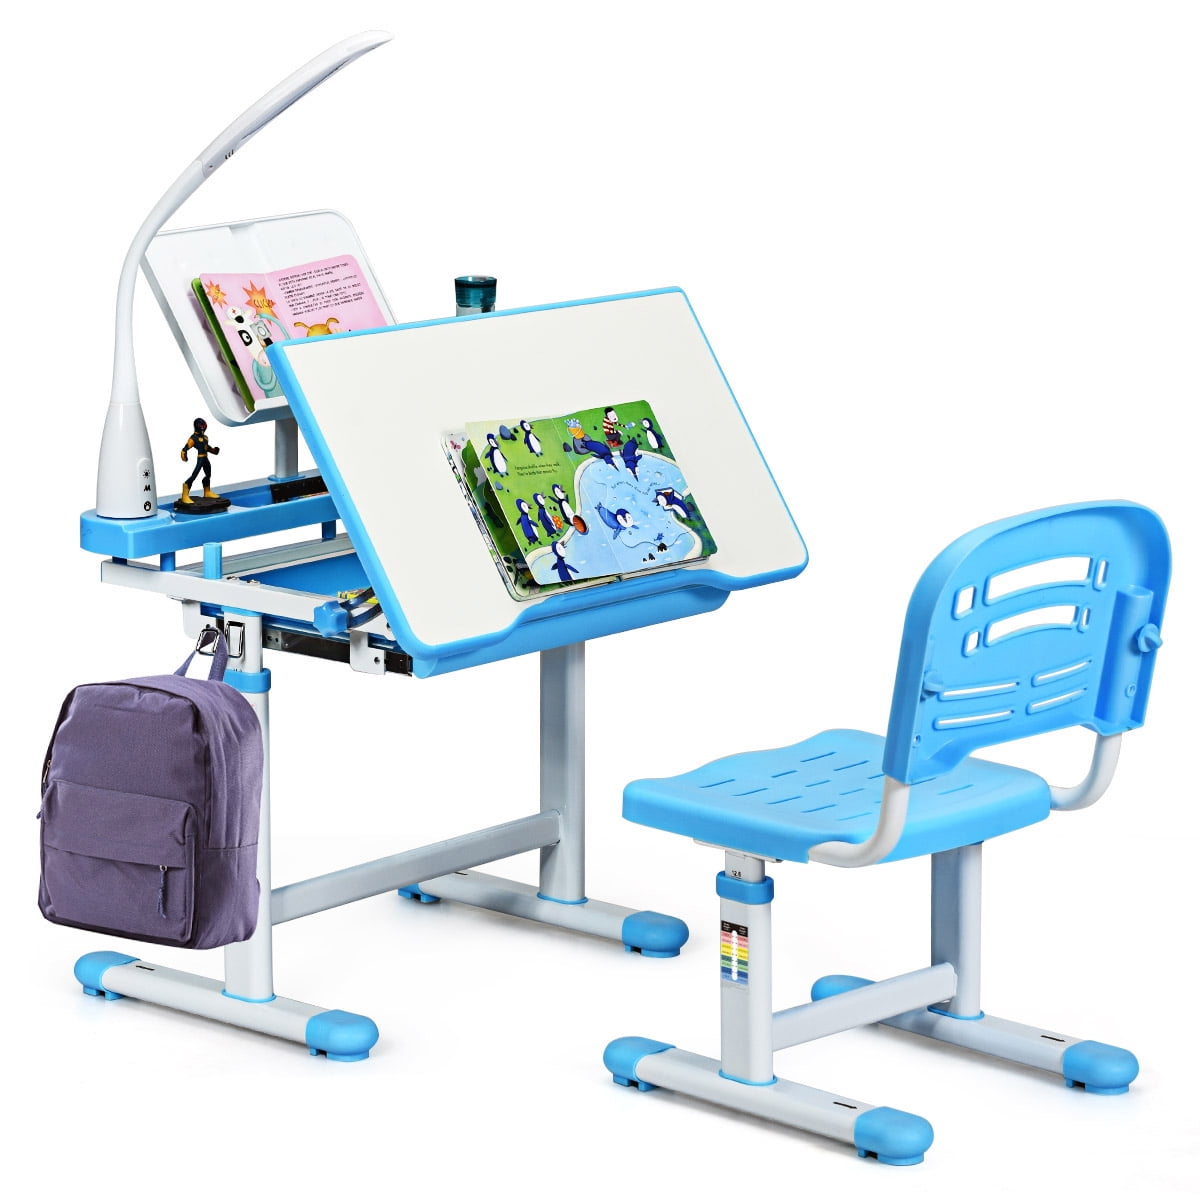 Study Desk Set with Modern Chair for Home GOTOTOP Table and Chair Set for Boys and Girls Blue Smooth Surface Nursery and School 